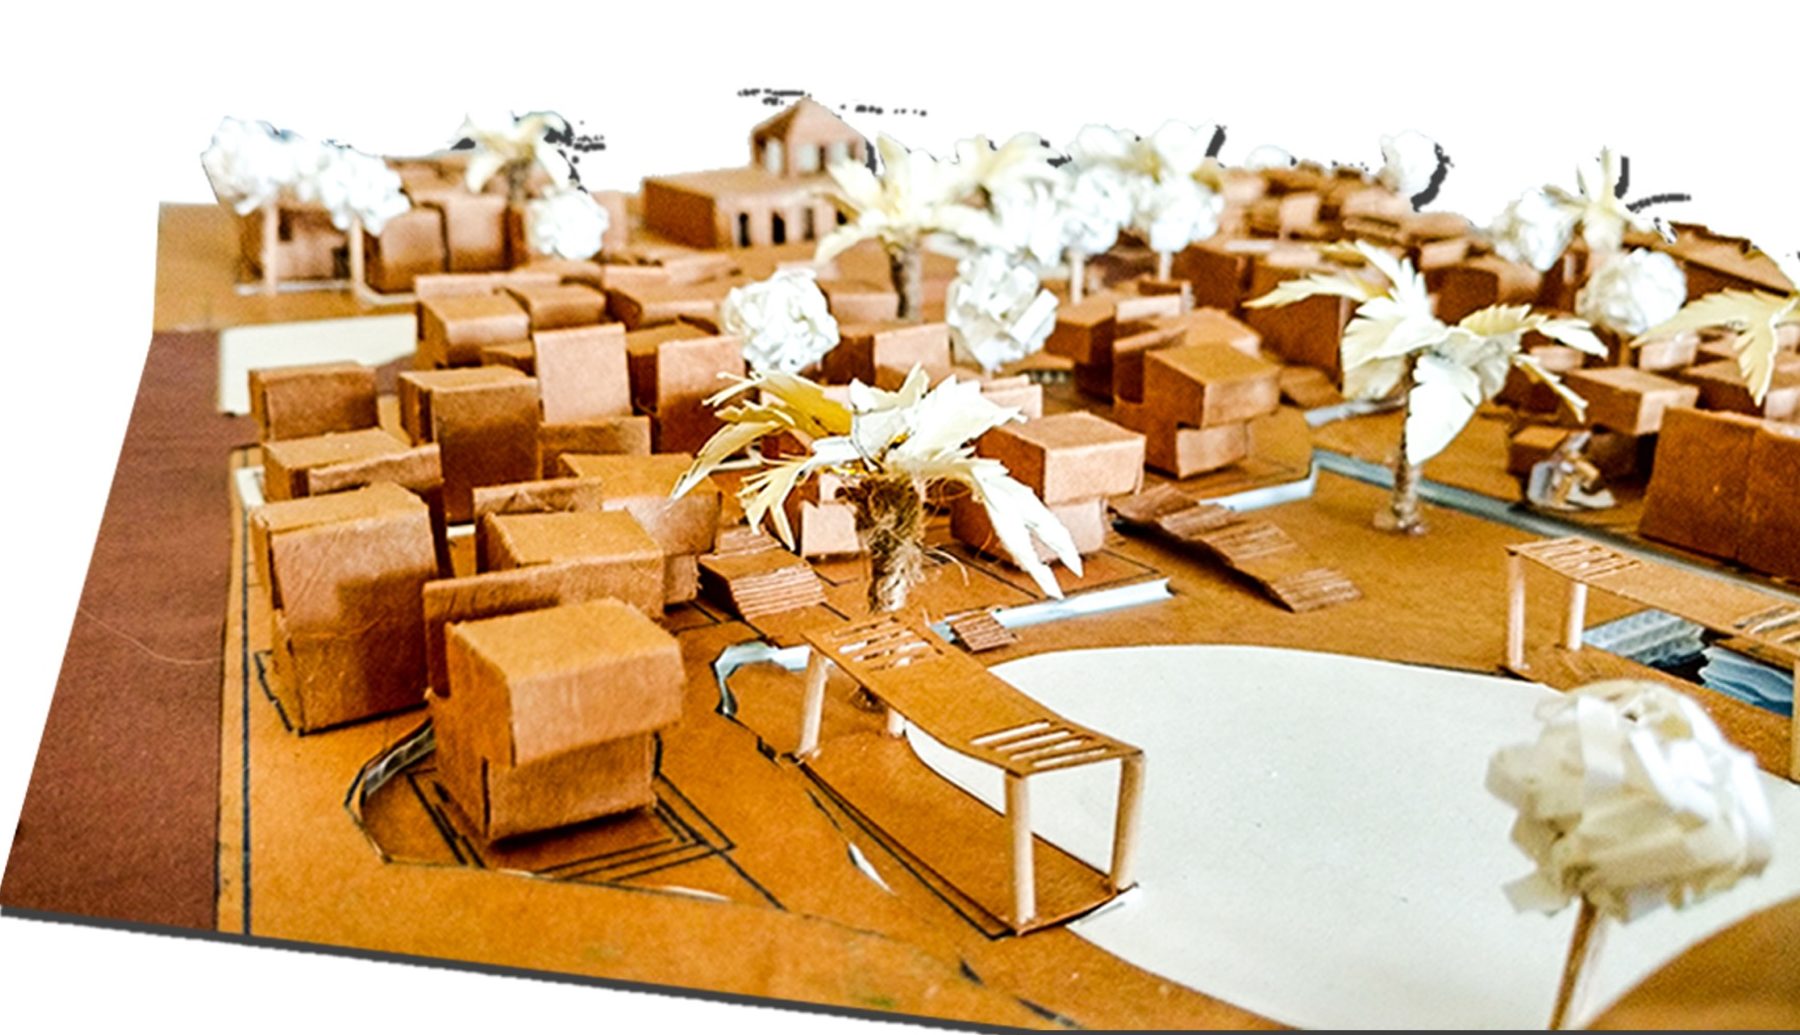 B.Arch Thesis: RESILIENT REHABILITATION FOR VICTIMS OF HUDHUD CYCLONE, ANDHRA PRADESH, by Sanand Telang 49